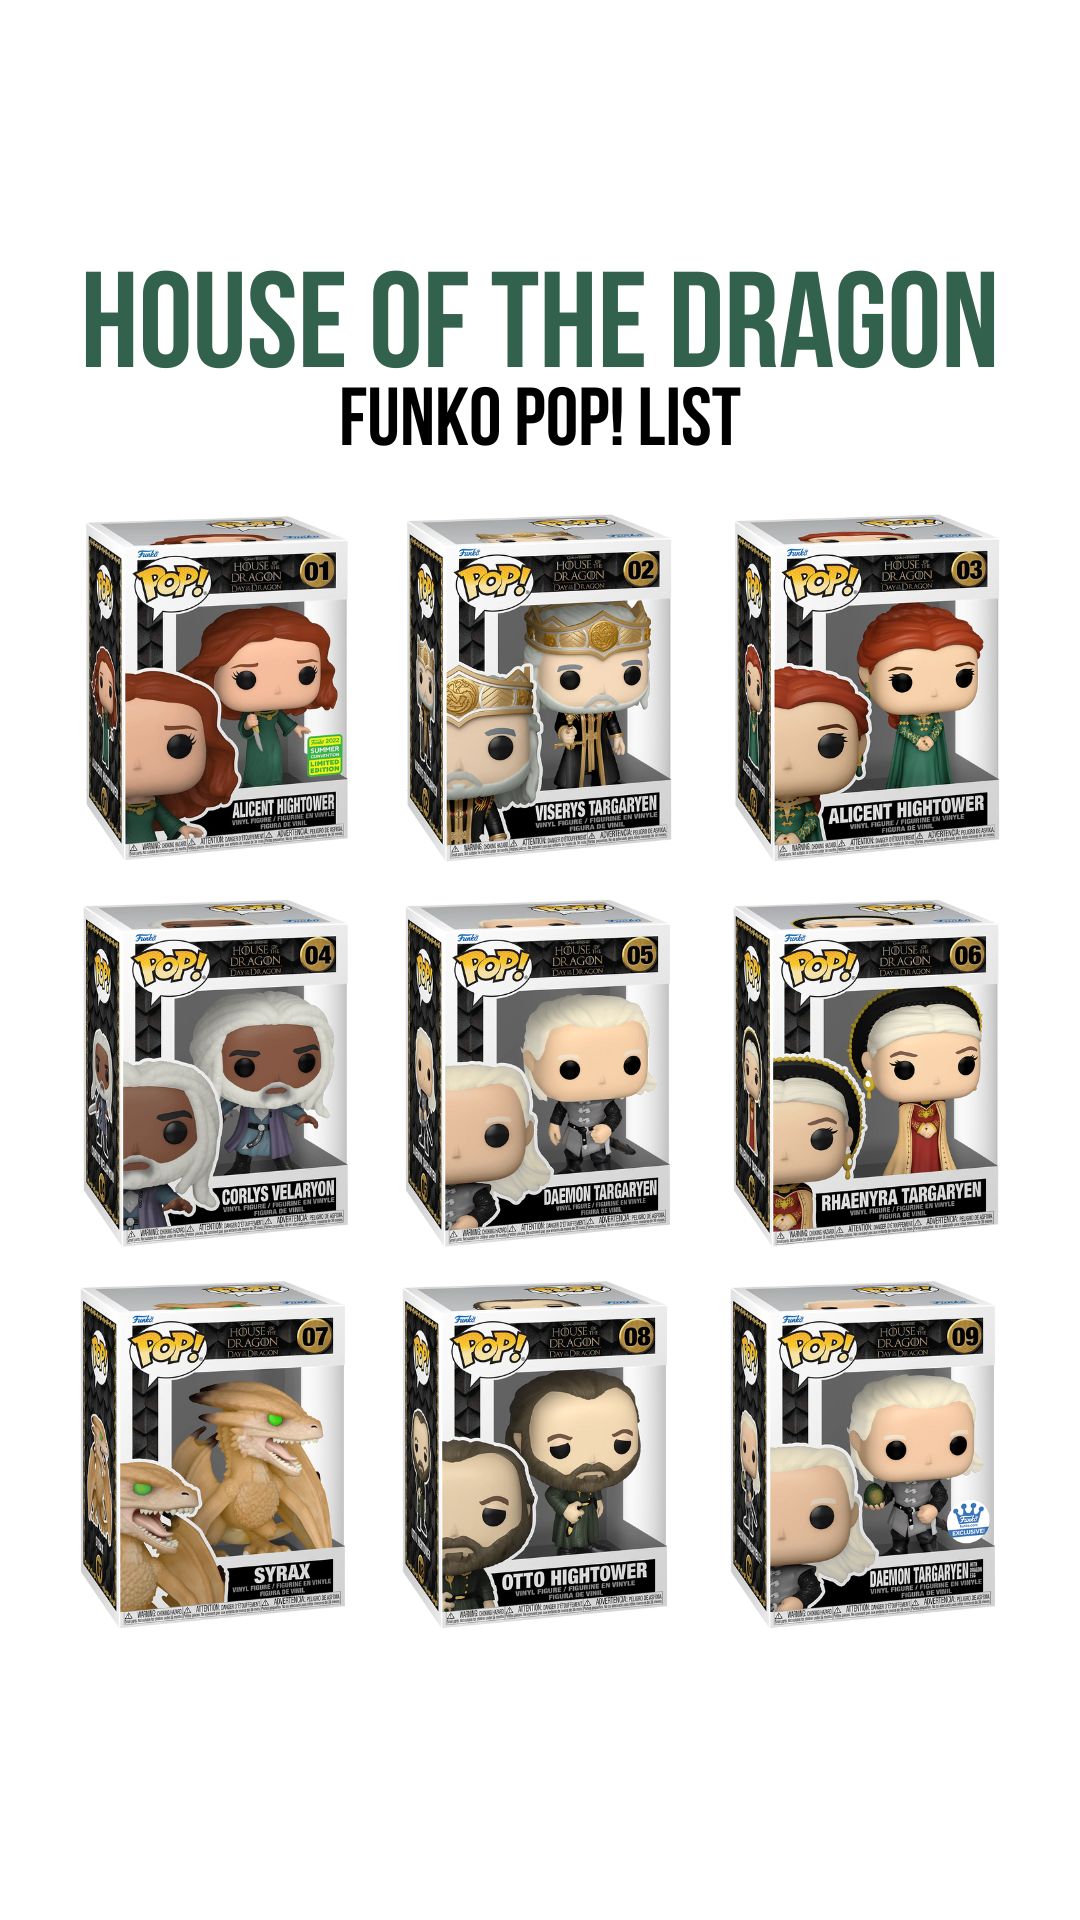 House of the Dragon Funko Pop List – Figures in Boxes Checklist